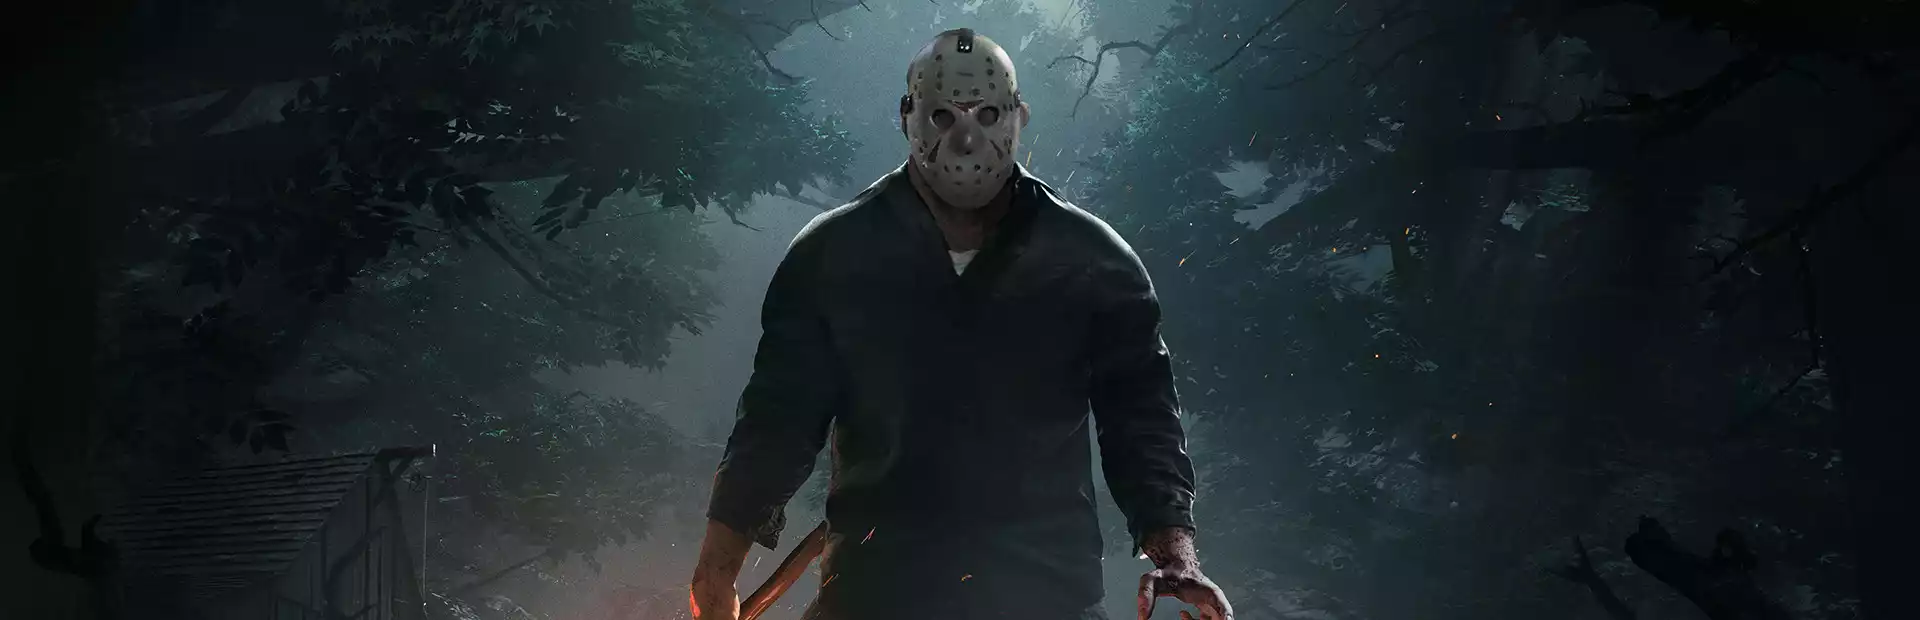 Friday the 13th: The Game Steam Key China